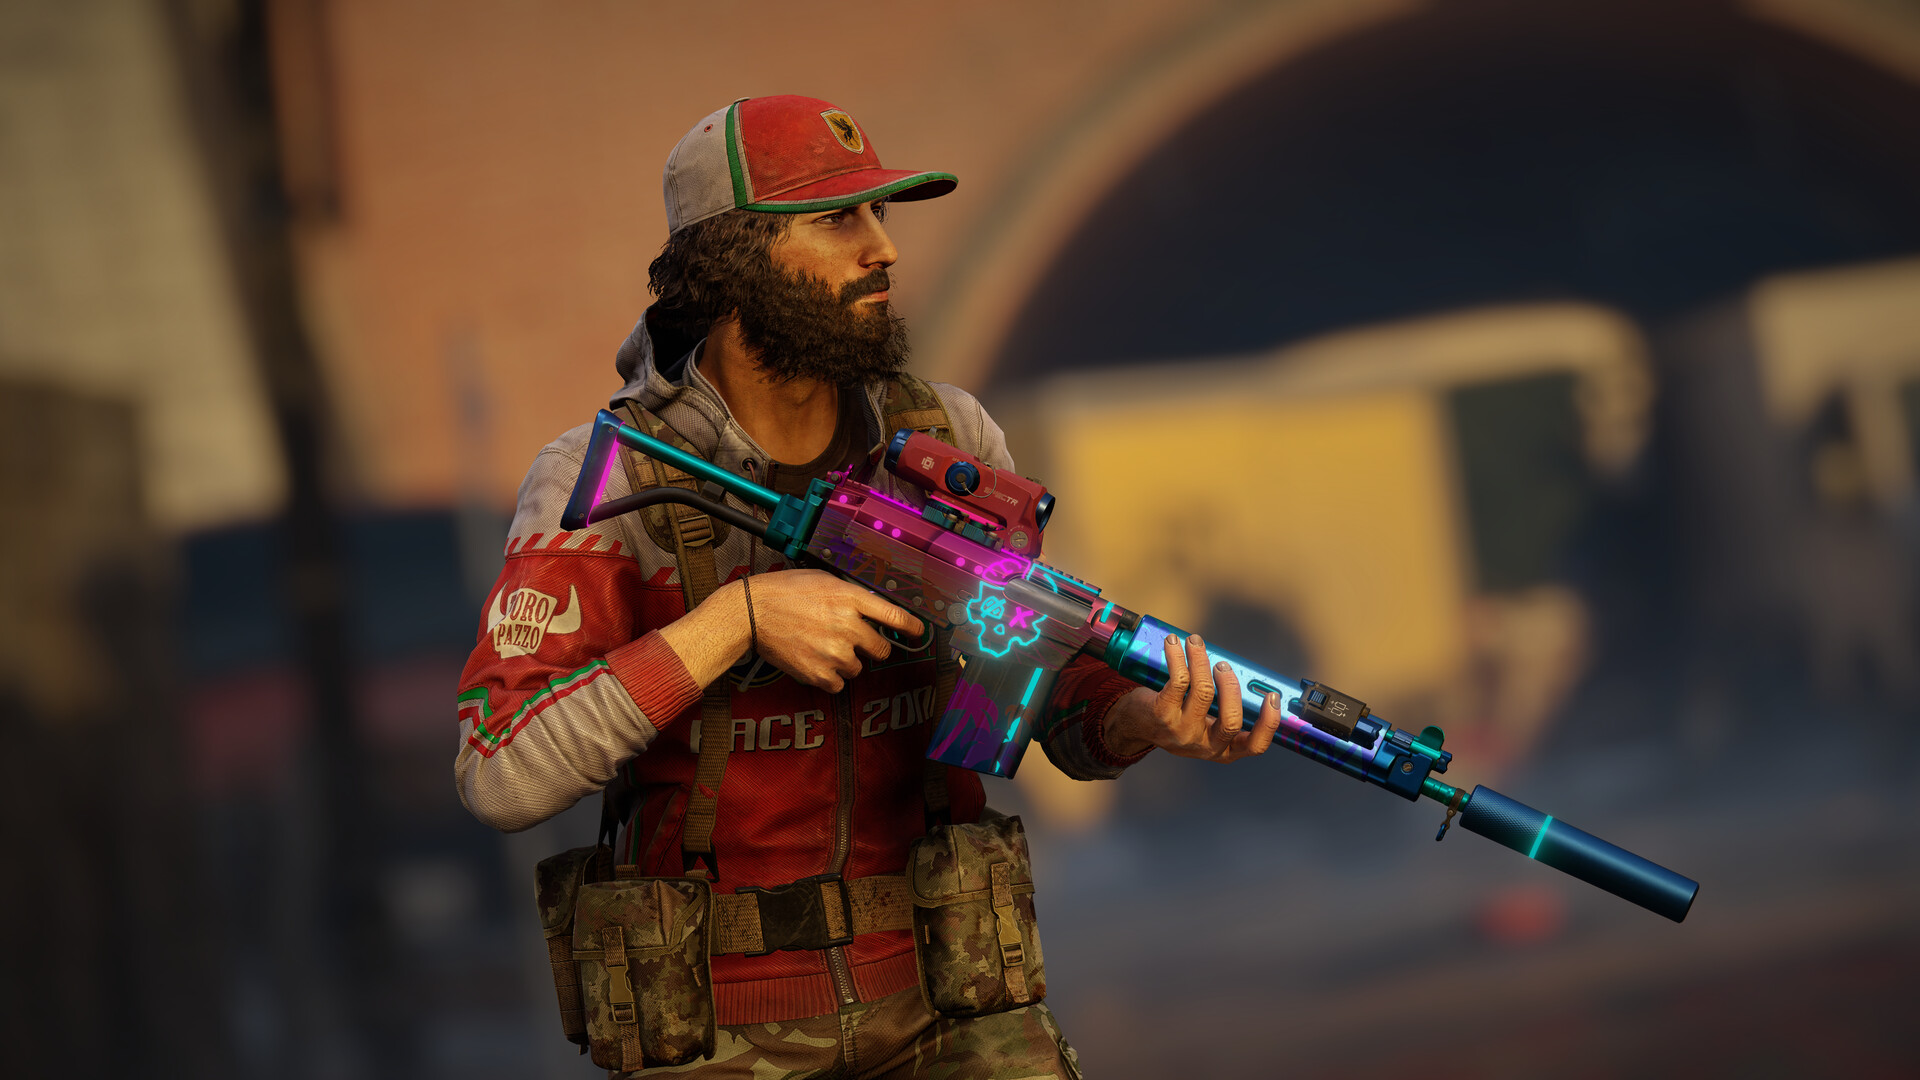 World War Z Aftermath New Weapons Skins - Characters